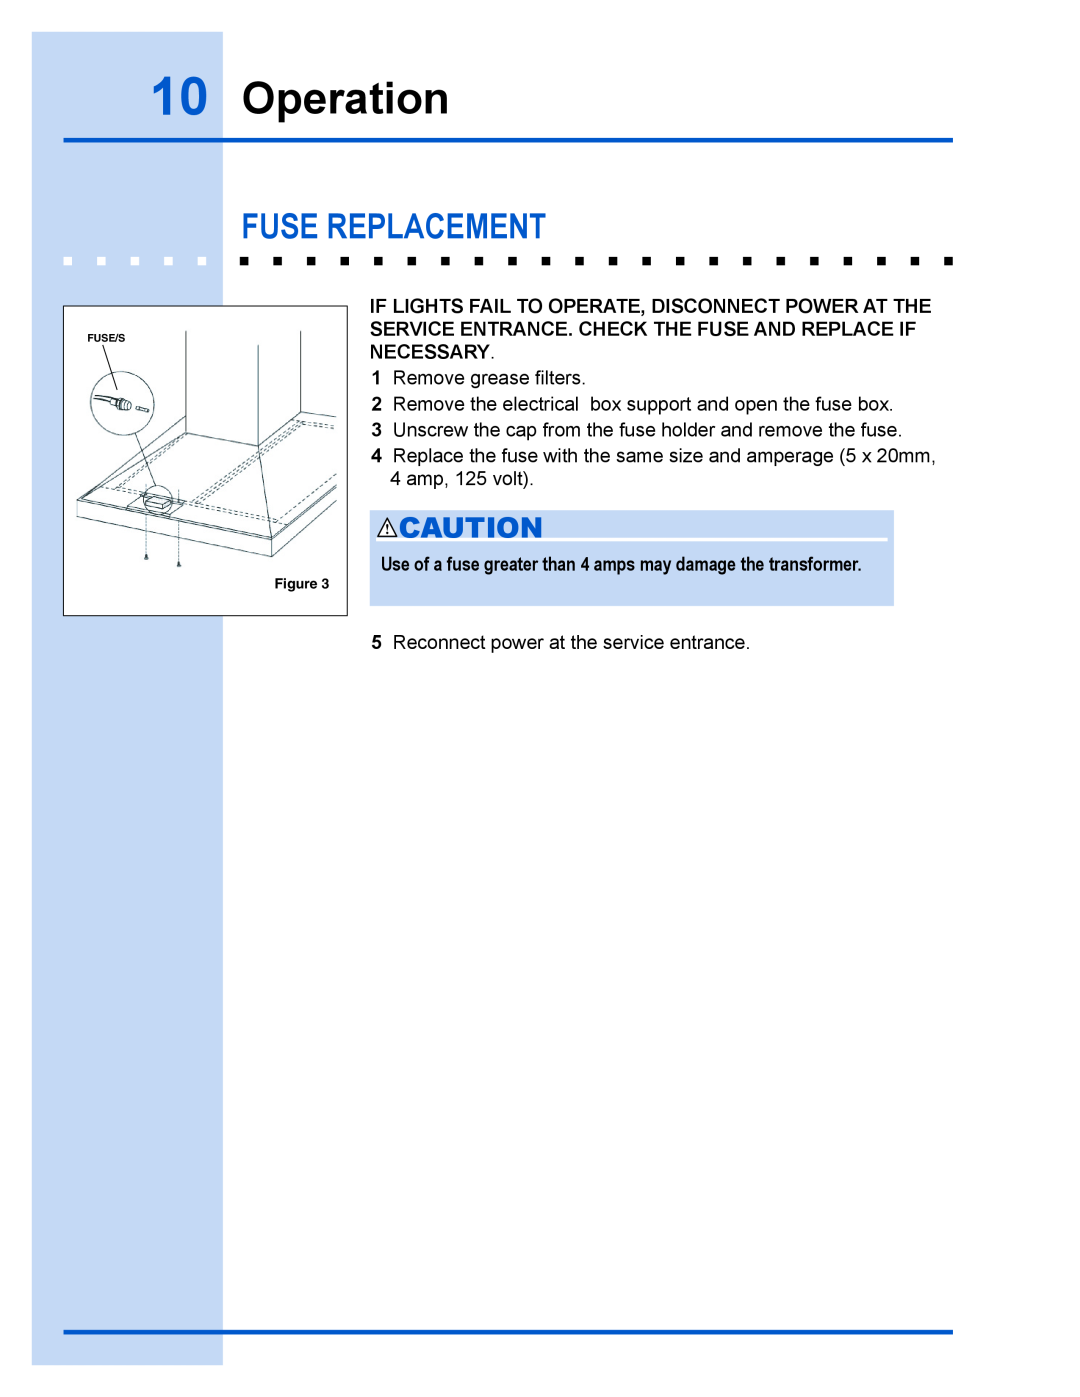 Electrolux E40PV100FS installation instructions Operation, Fuse Replacement 